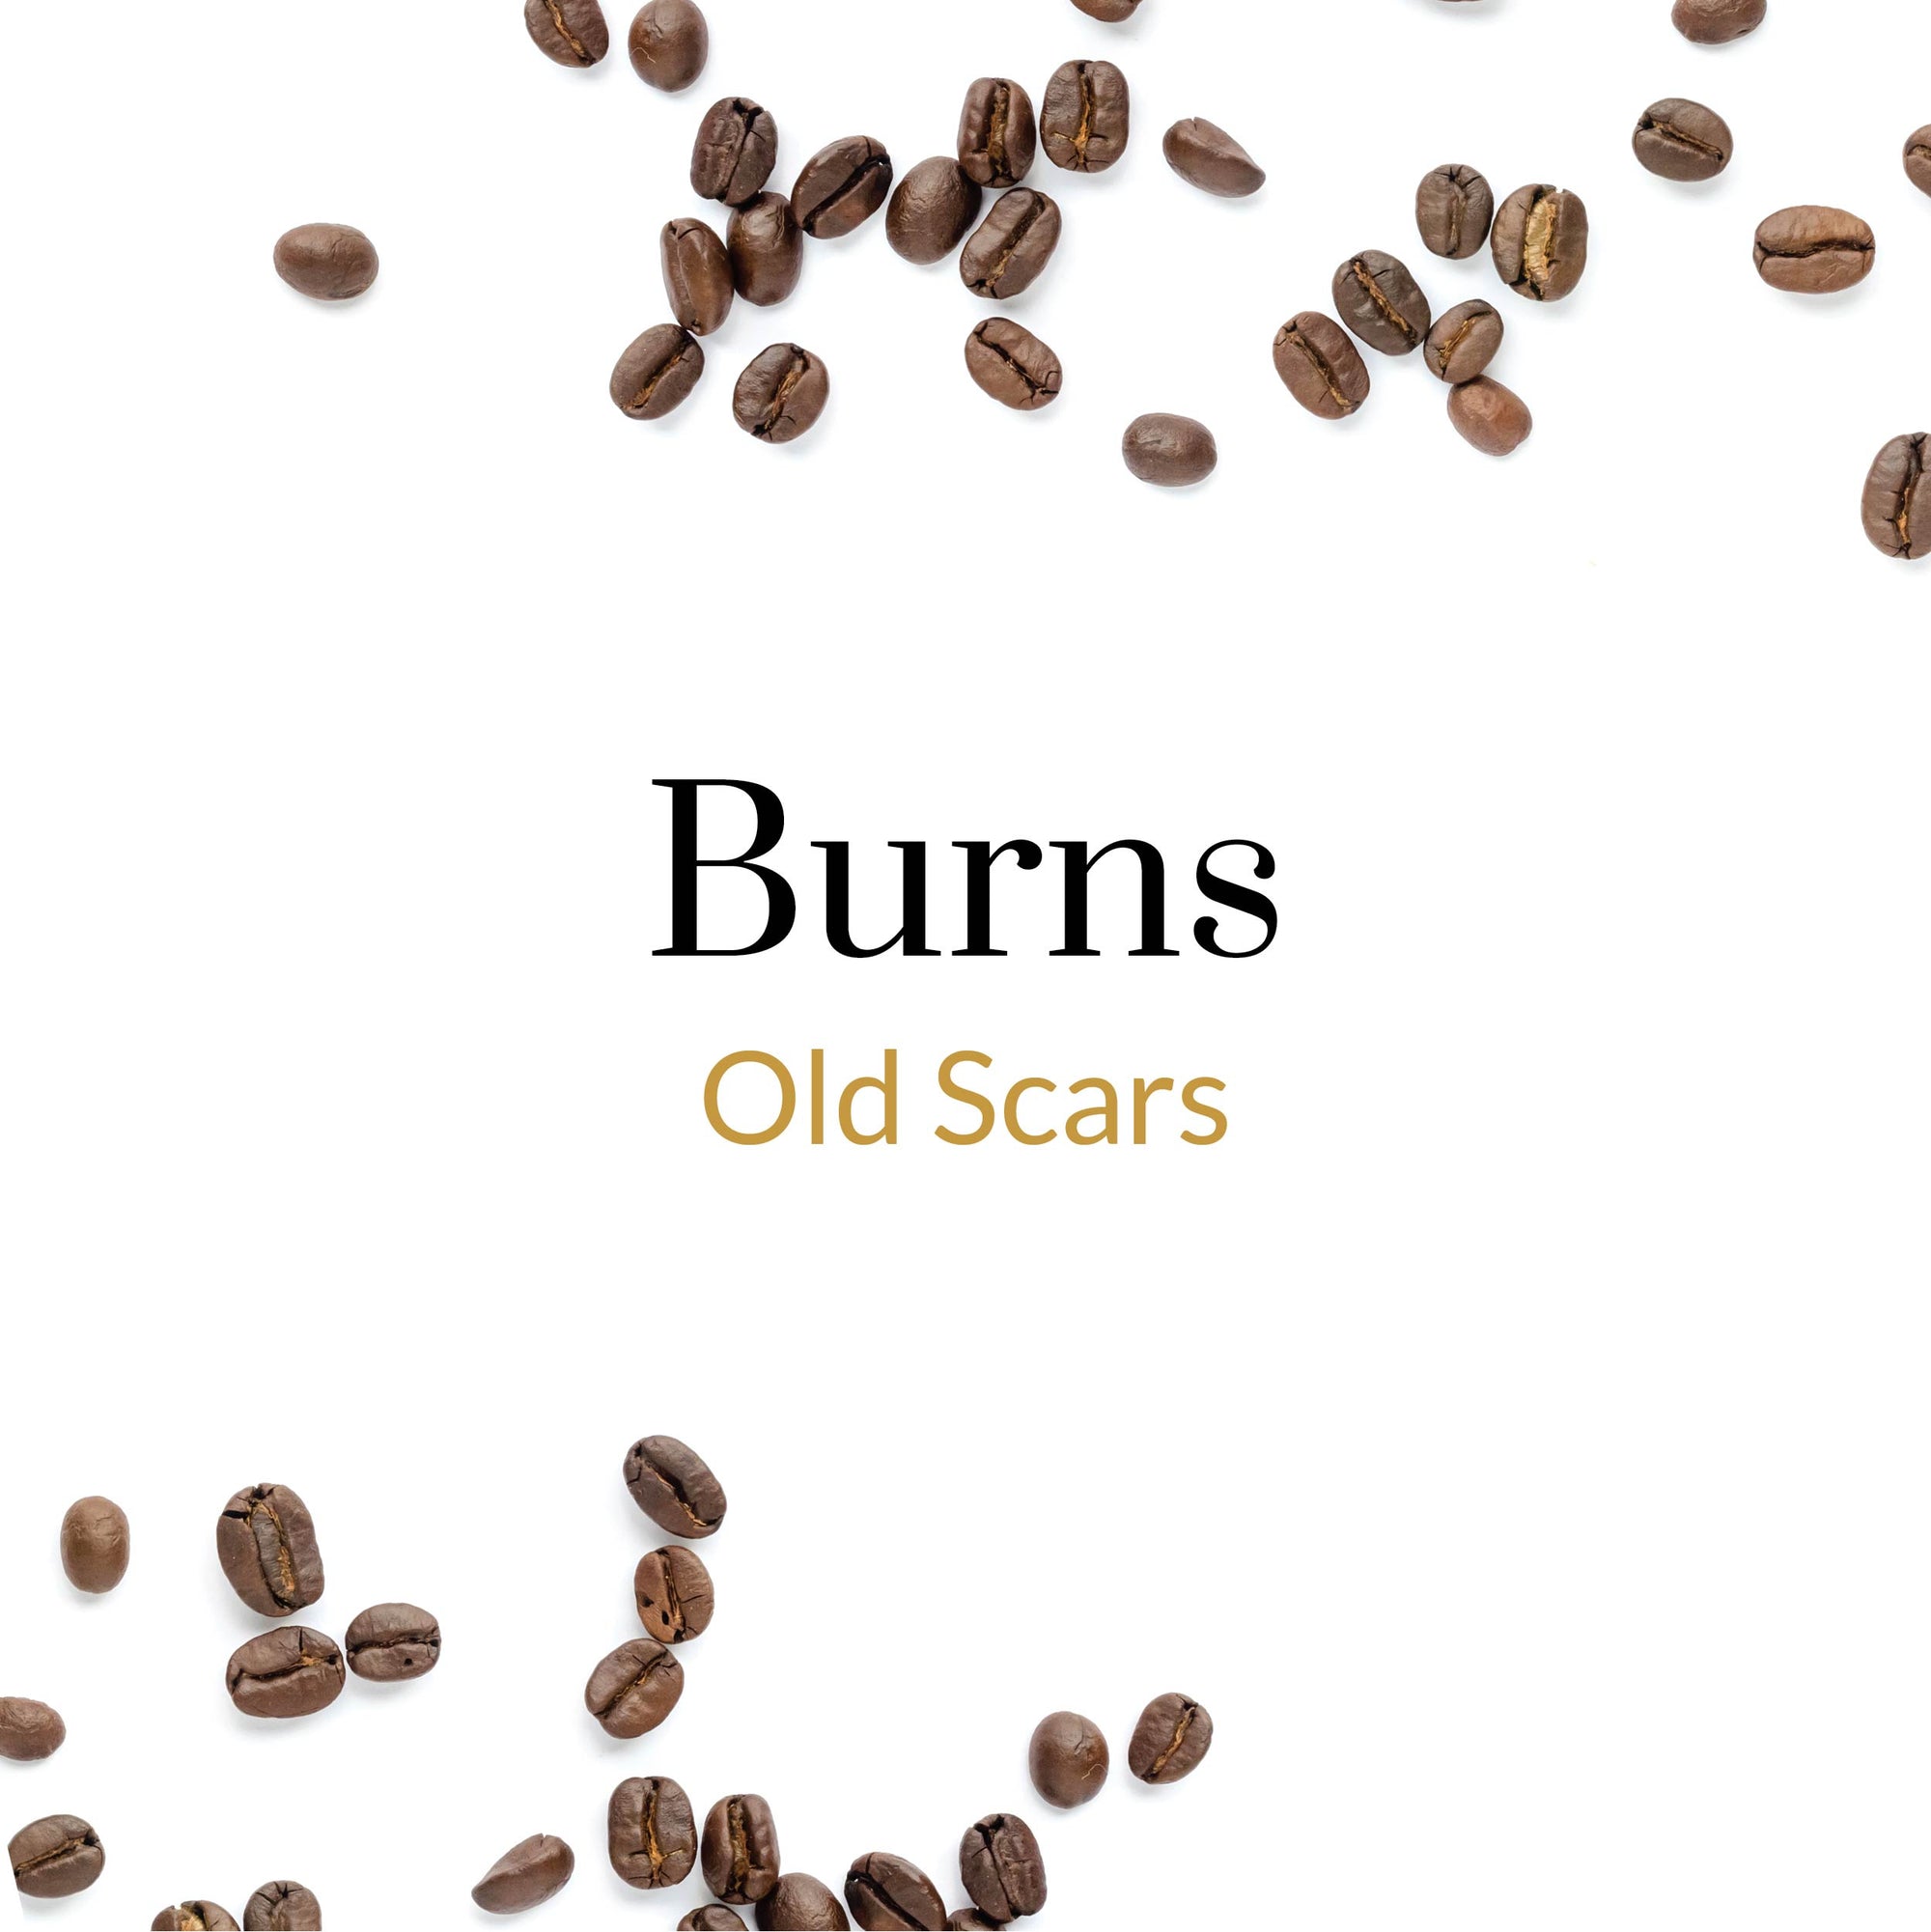 Old Scars - Burns